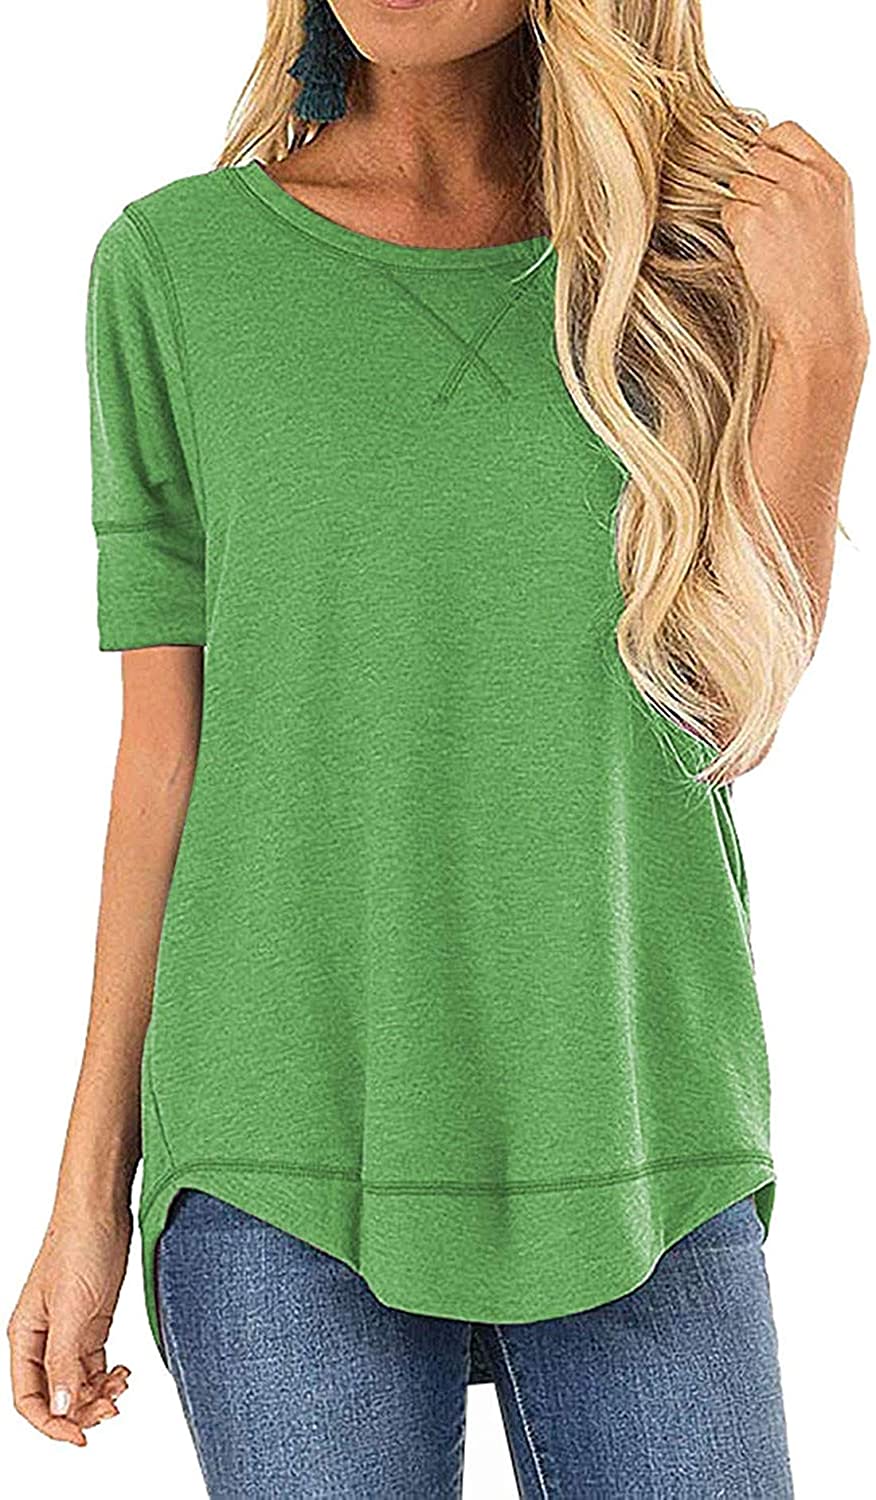 JomeDesign Summer Tops for Women Short Sleeve Side Split Casual Loose Tunic Top 